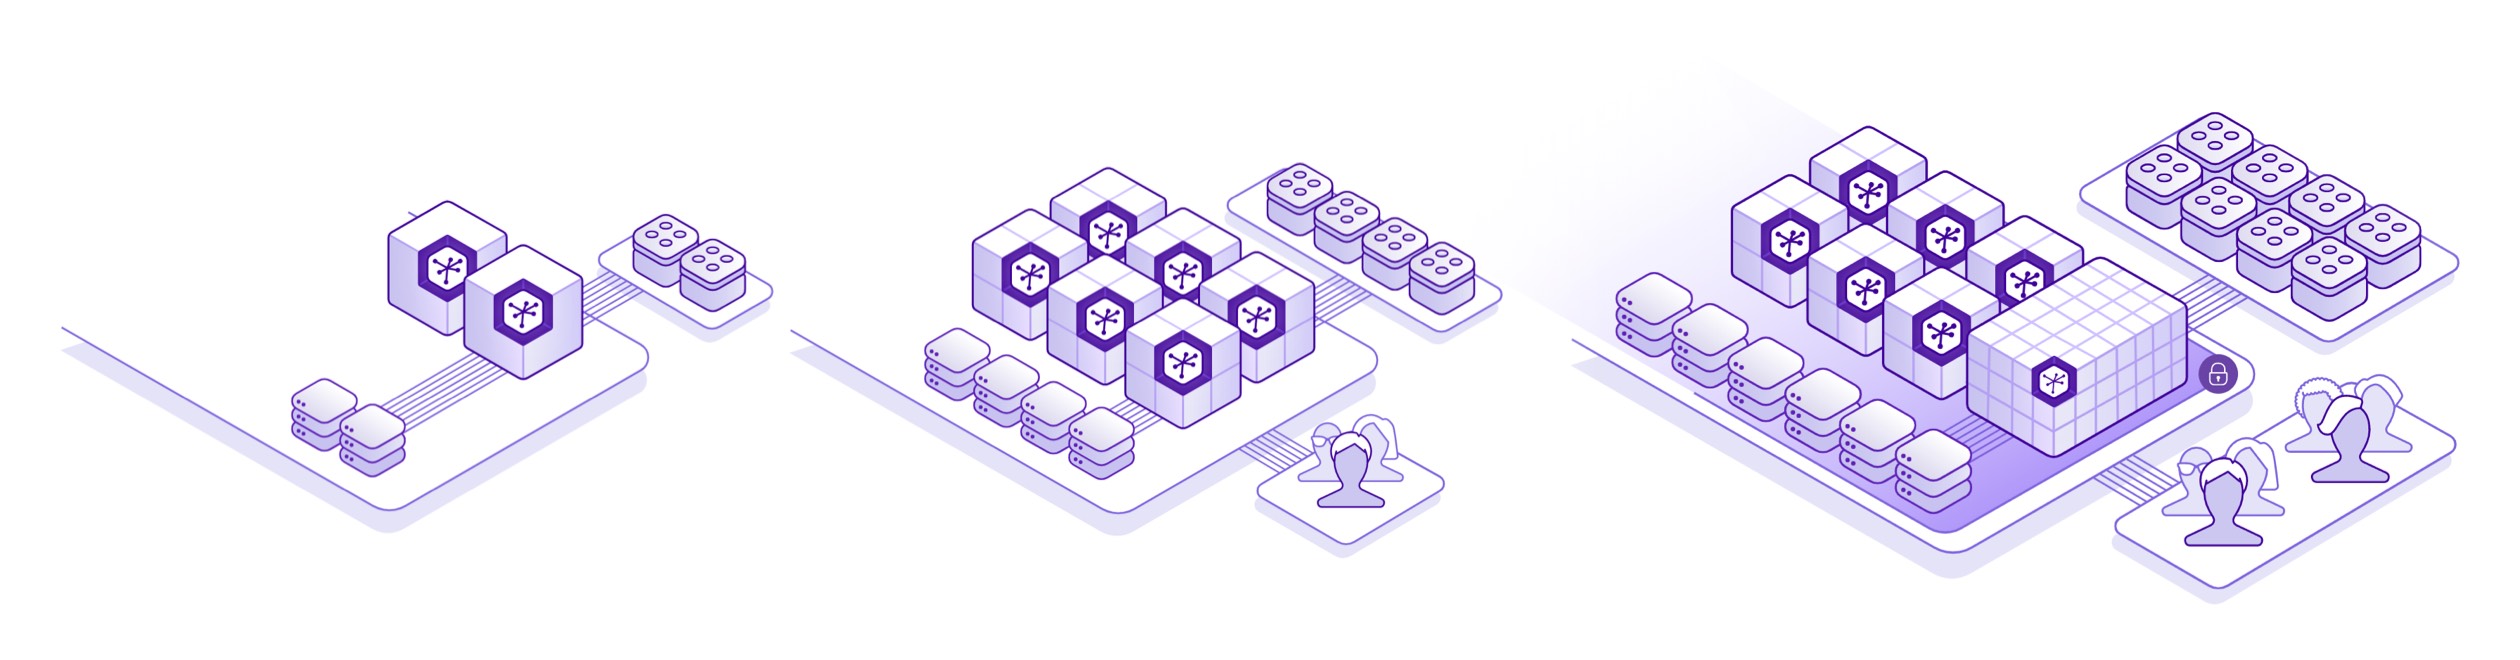 A visualization of the options for growth with Heroku, featuring databases, apps, and teams